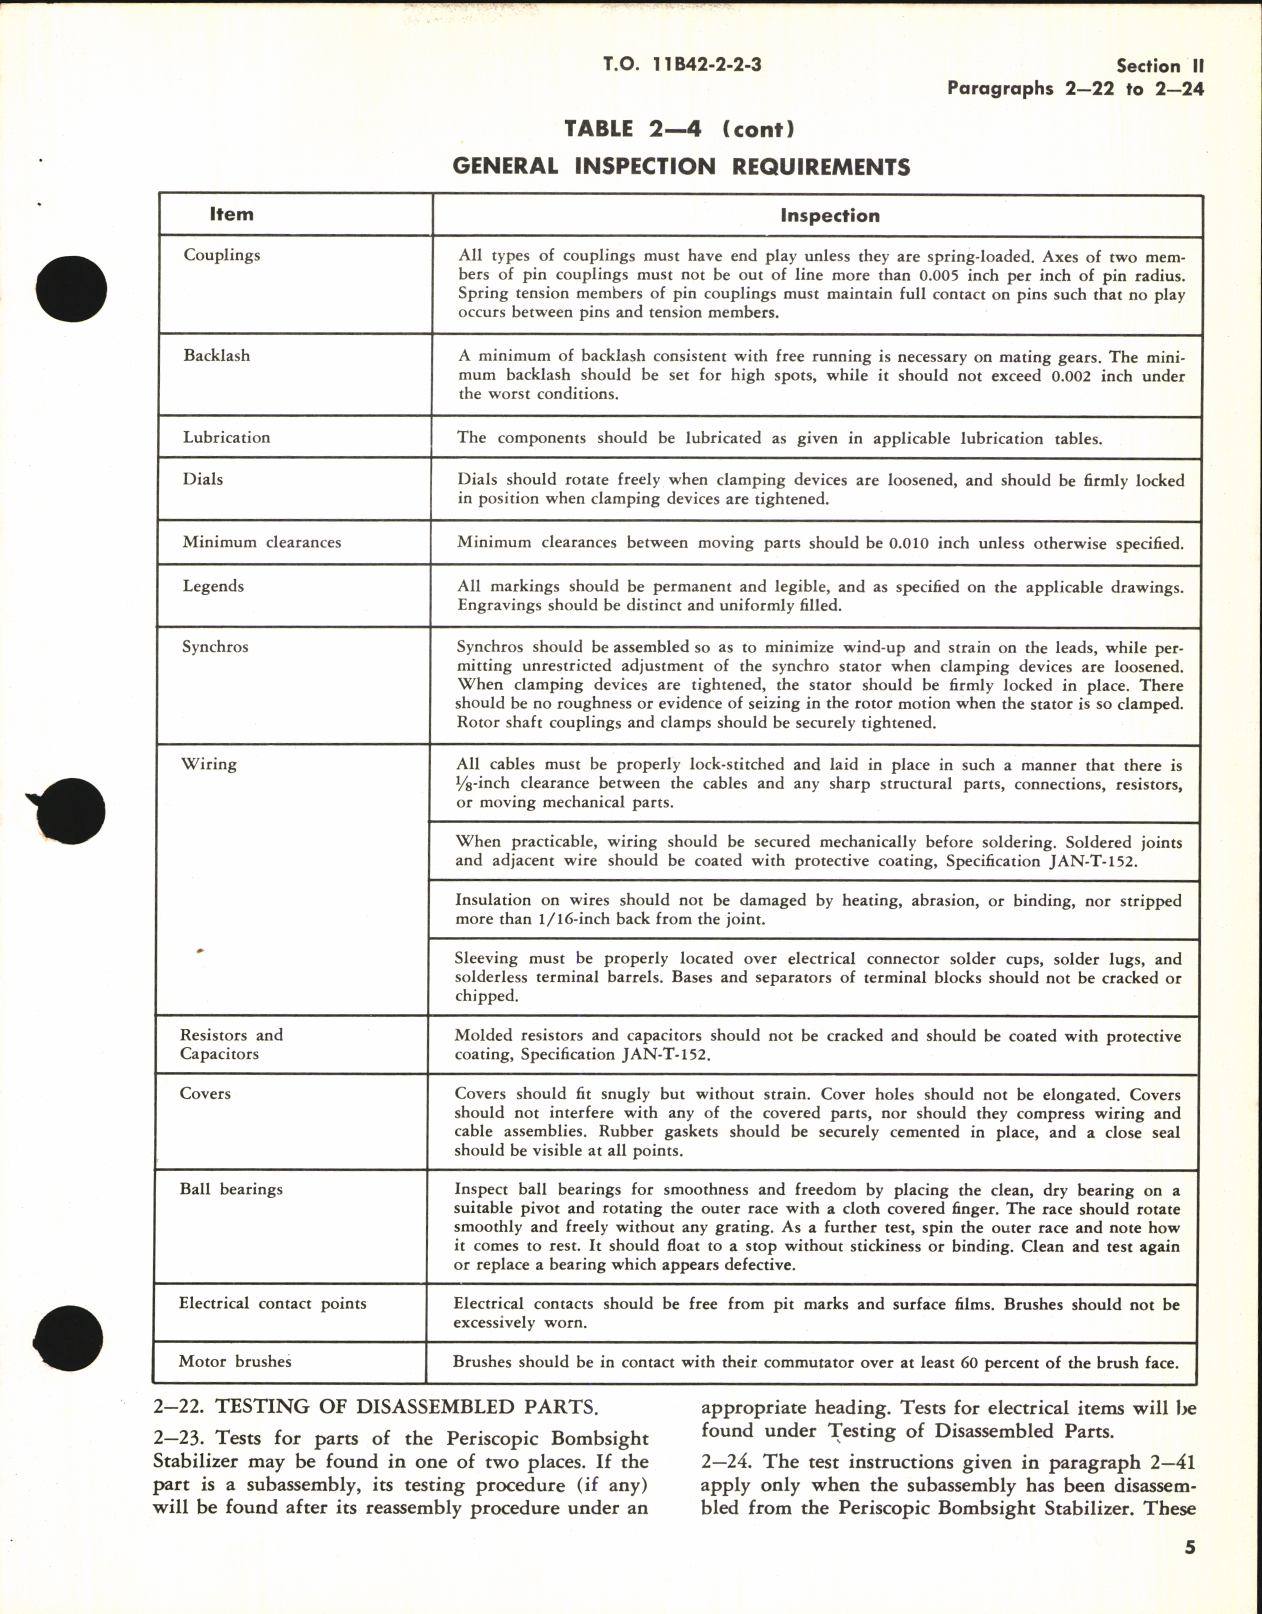 Sample page 7 from AirCorps Library document: Overhaul Instructions for Periscopic Bombsight Stabilizer Type B-1